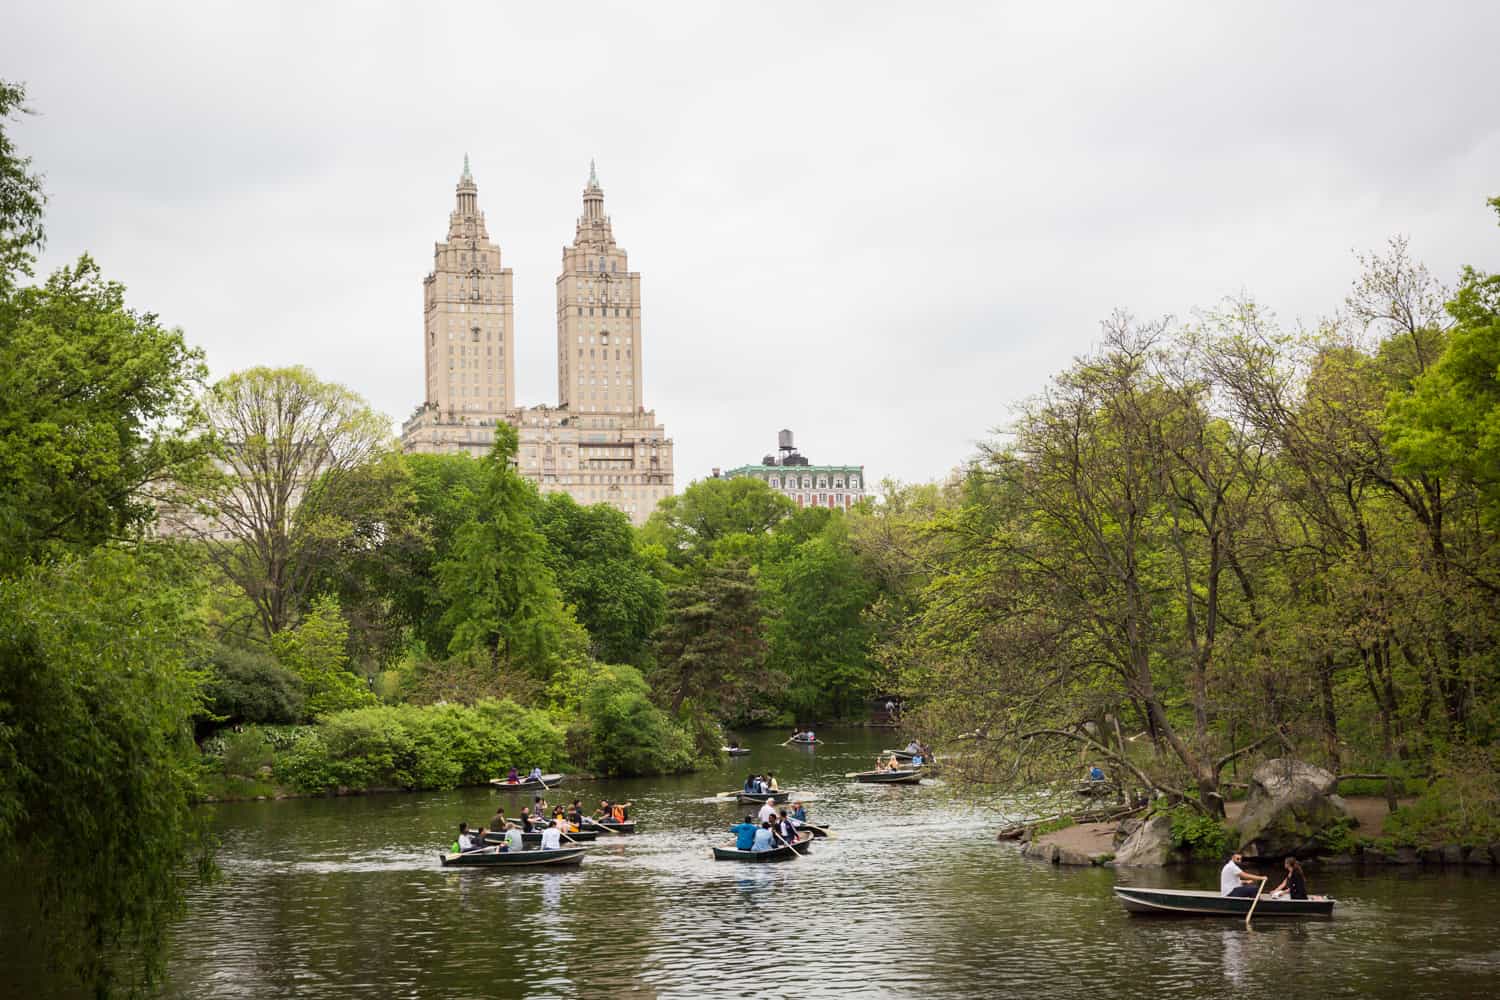 Boats on Central Park Lake